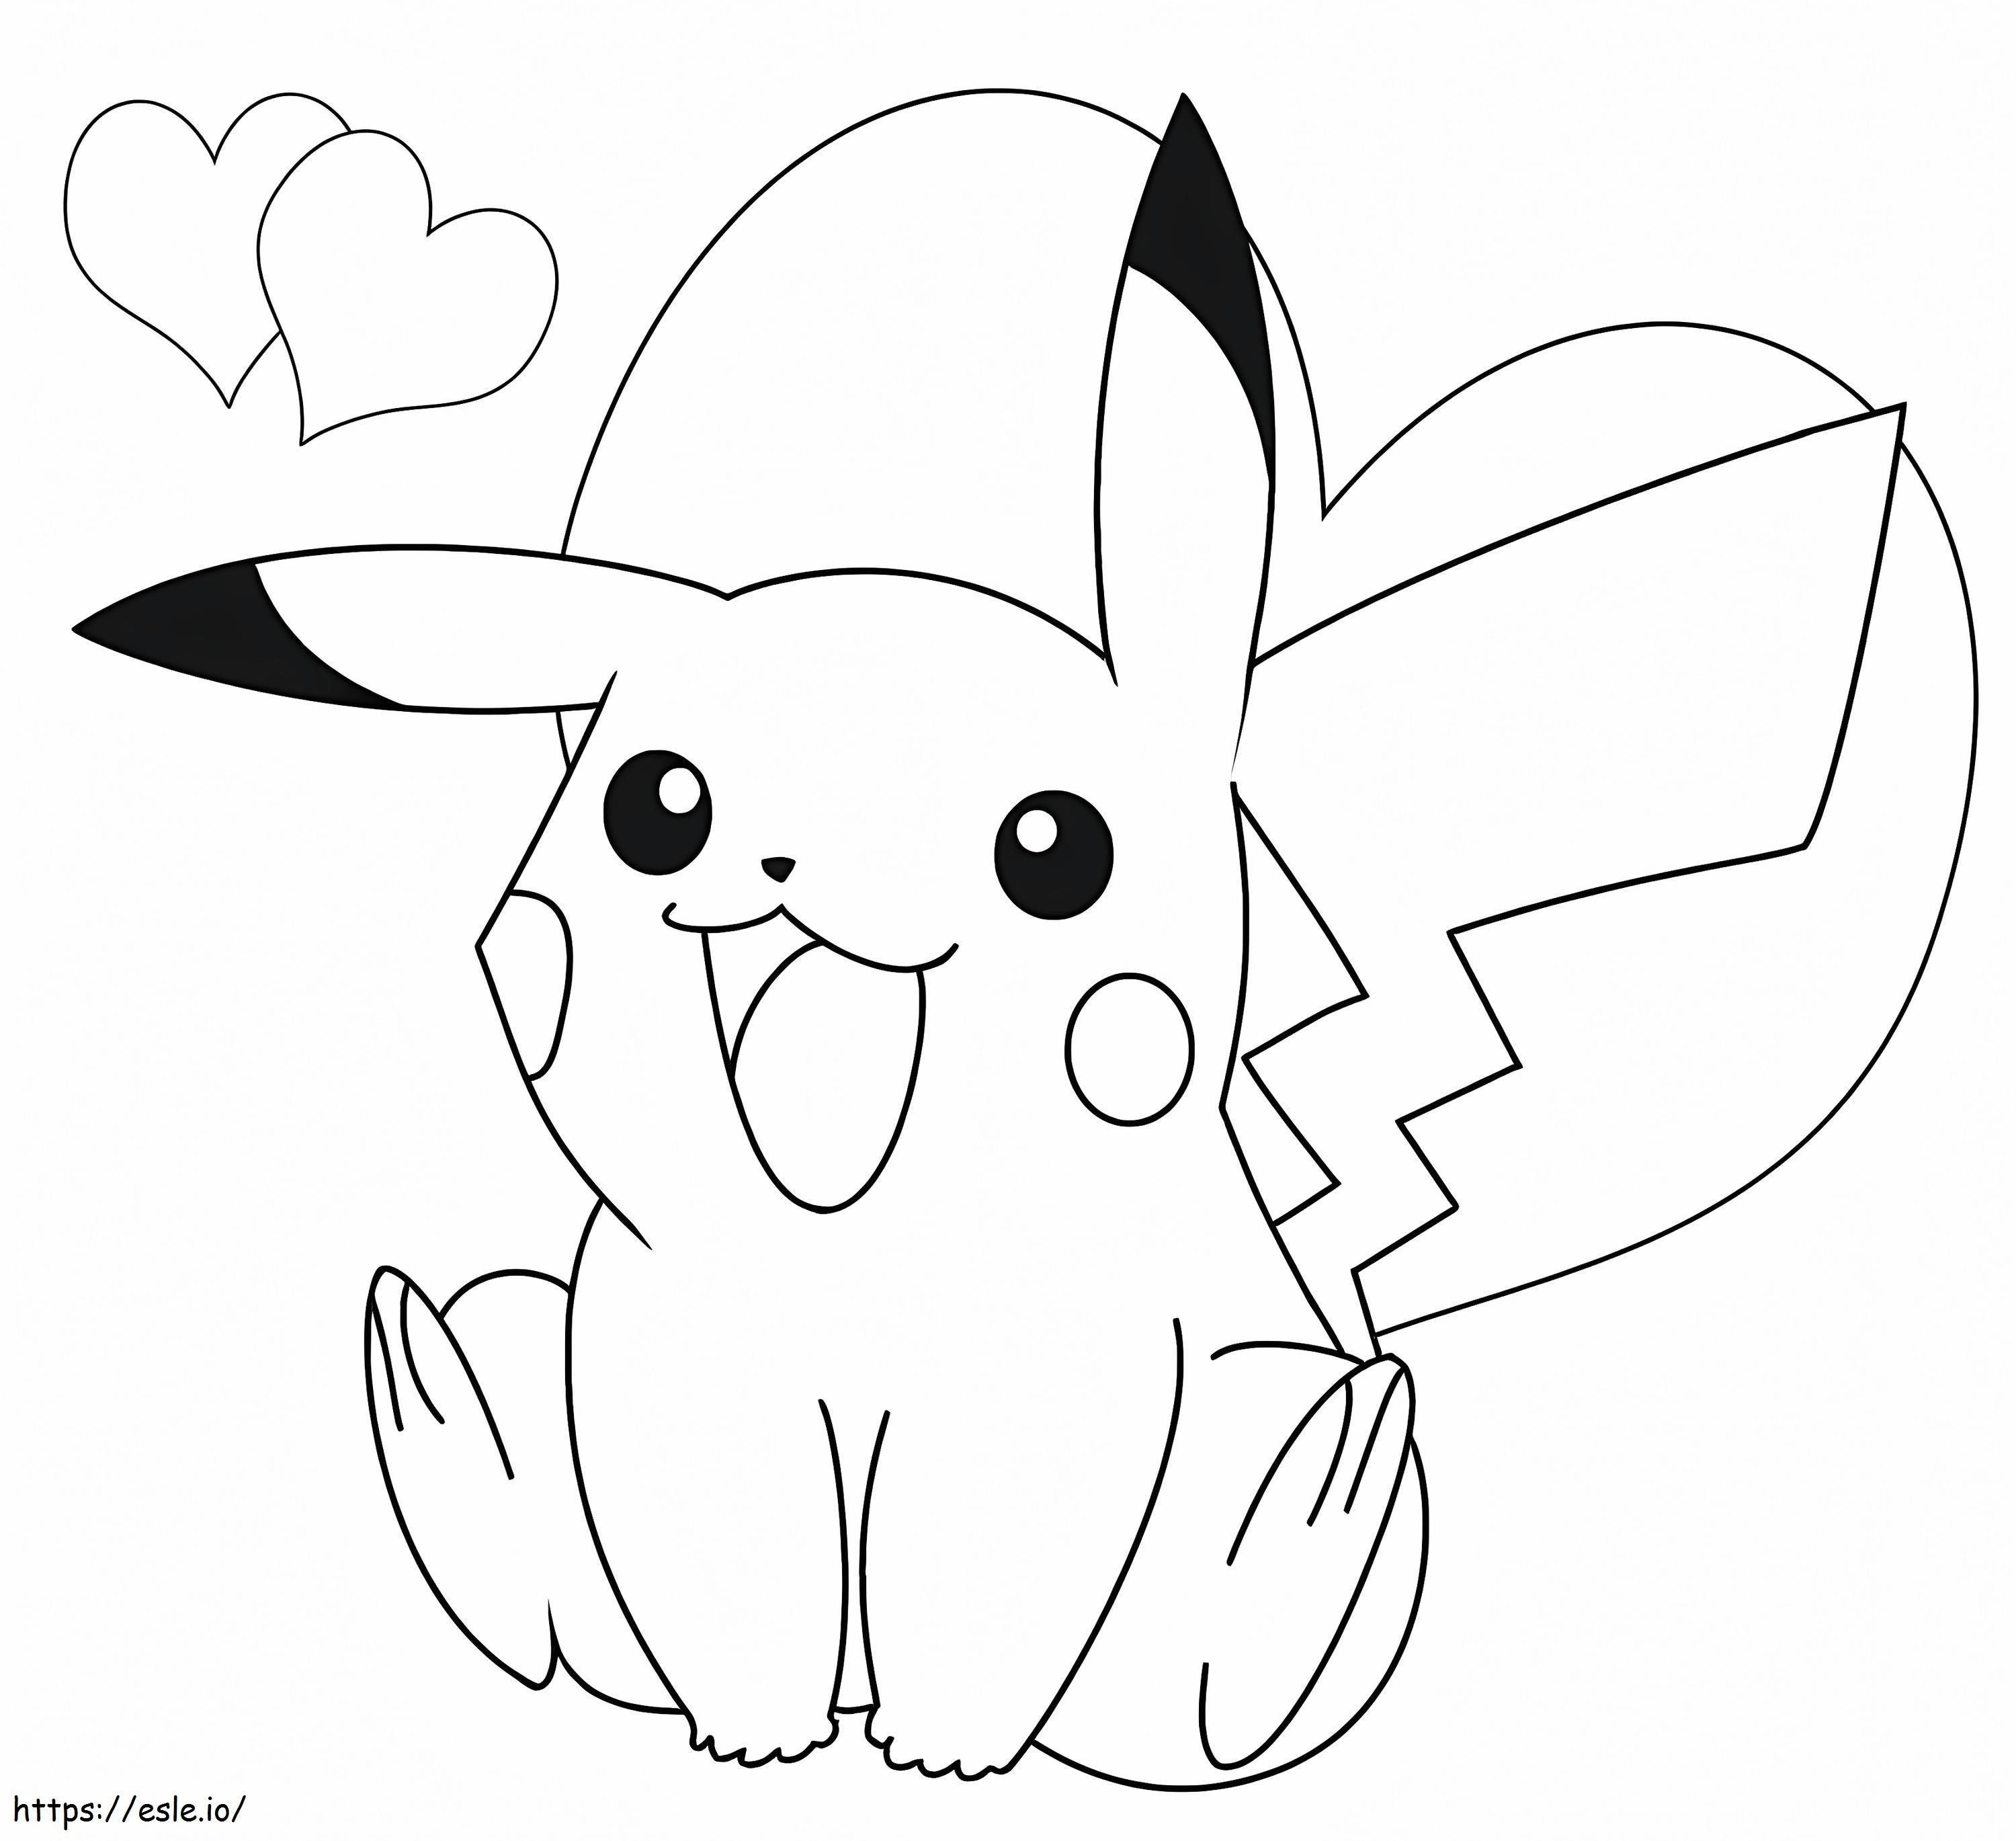 Pikachu Seated coloring page